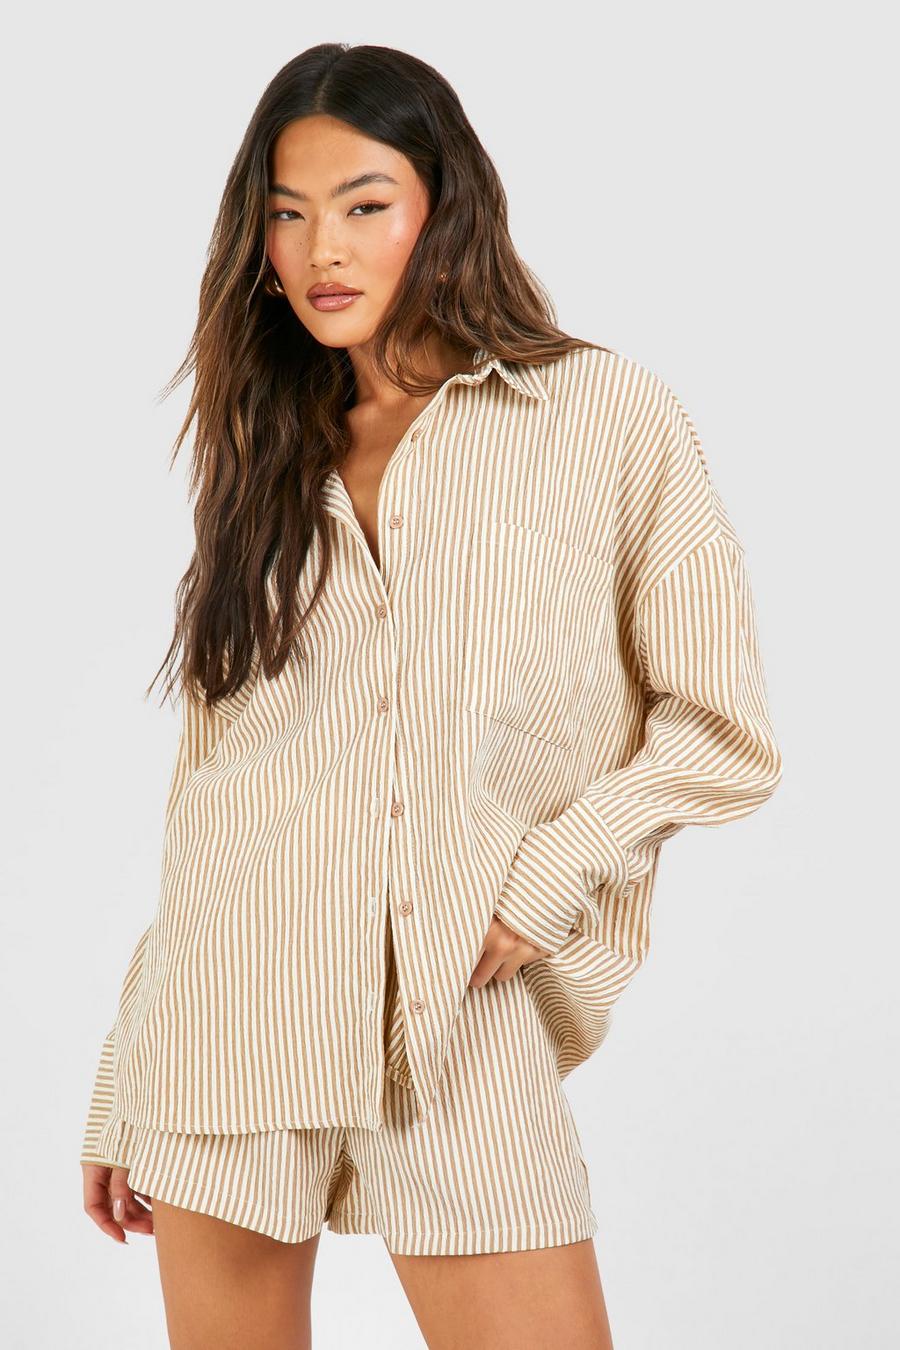 Stone Textured Stripe Relaxed Fit Shirt image number 1